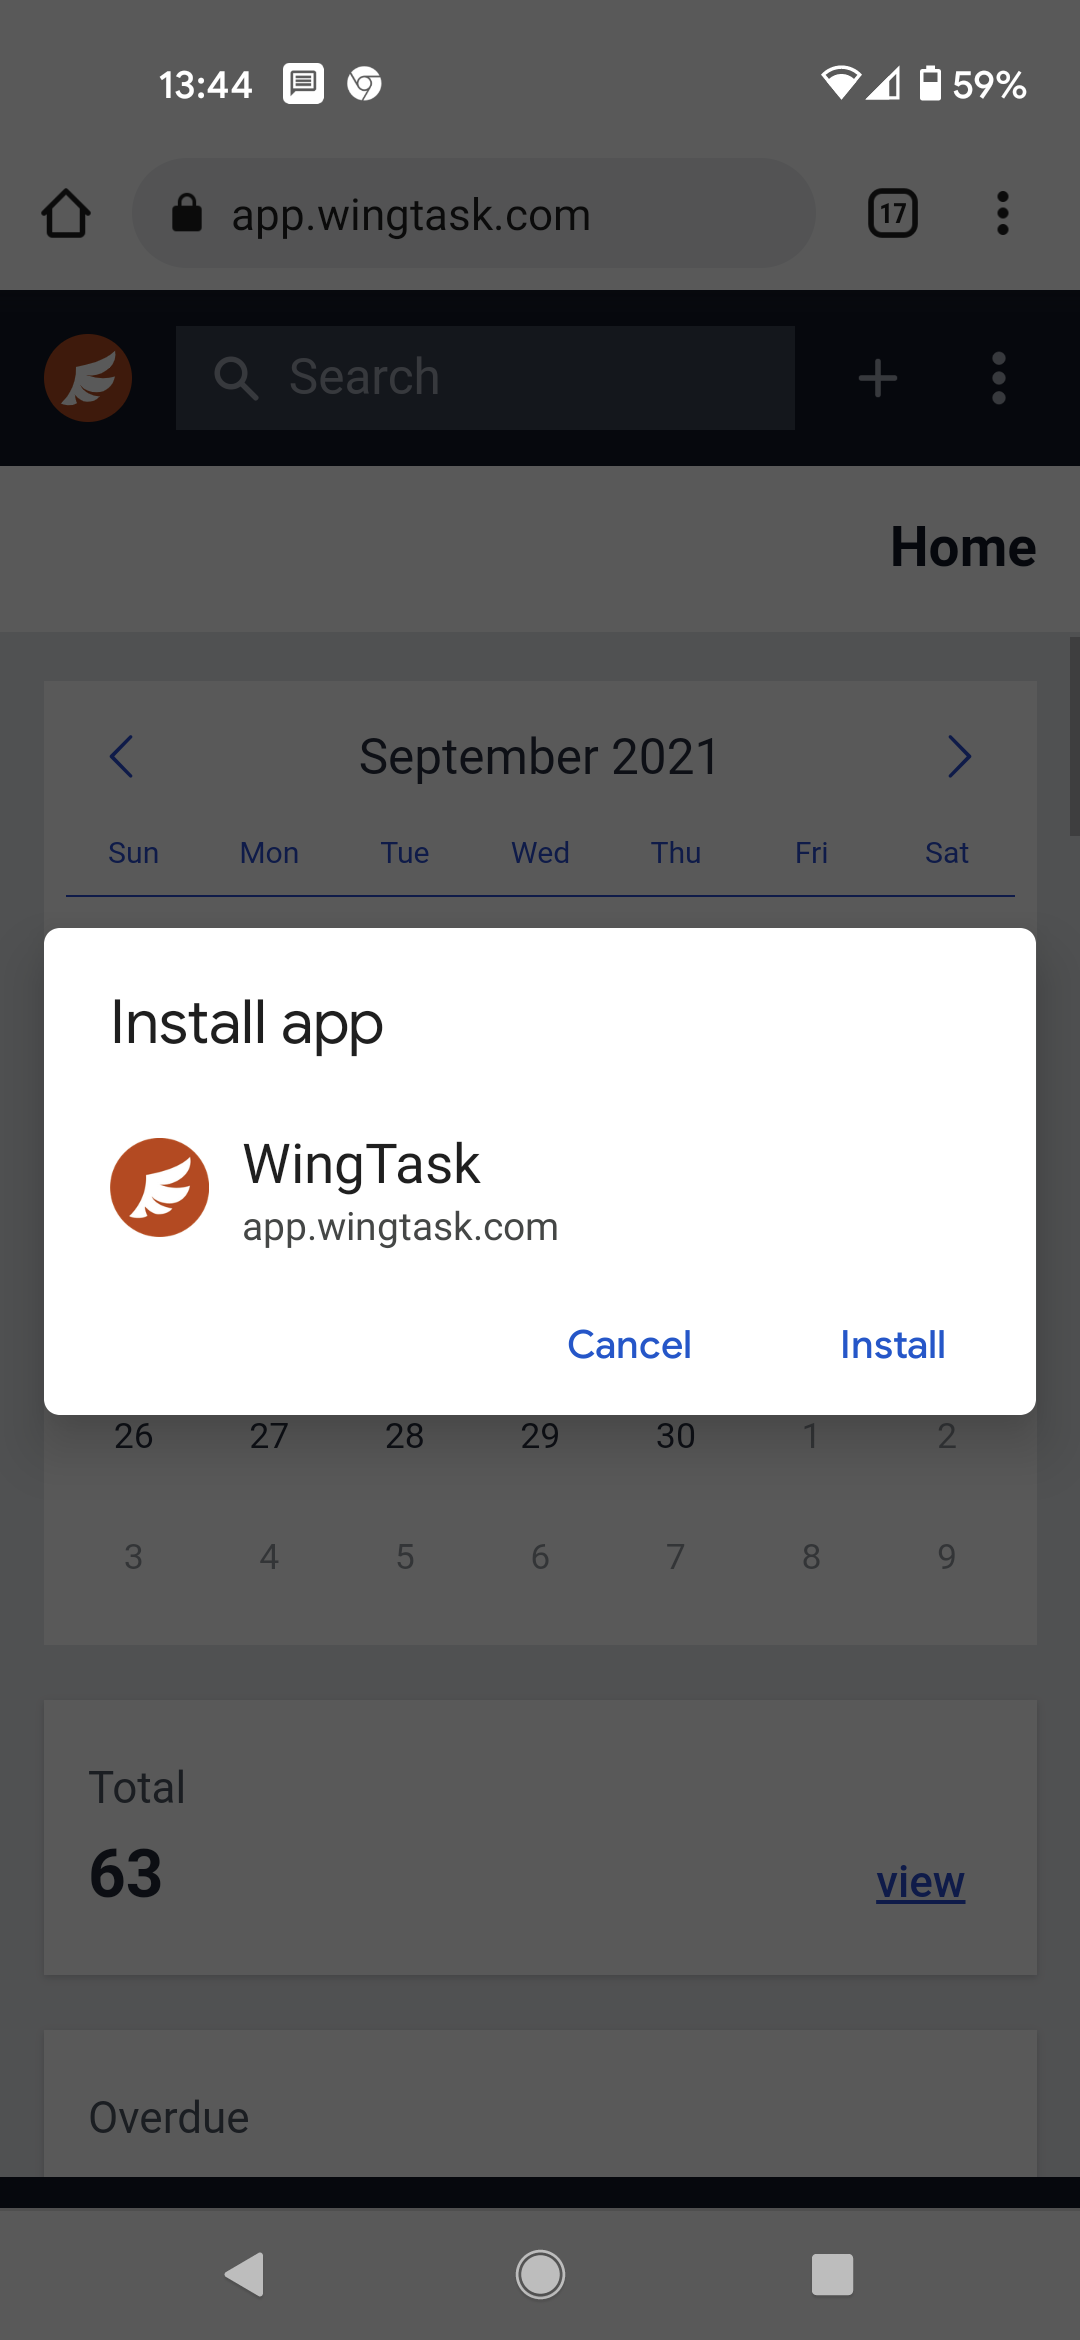 Confirm dialog to add WingTask to home screen